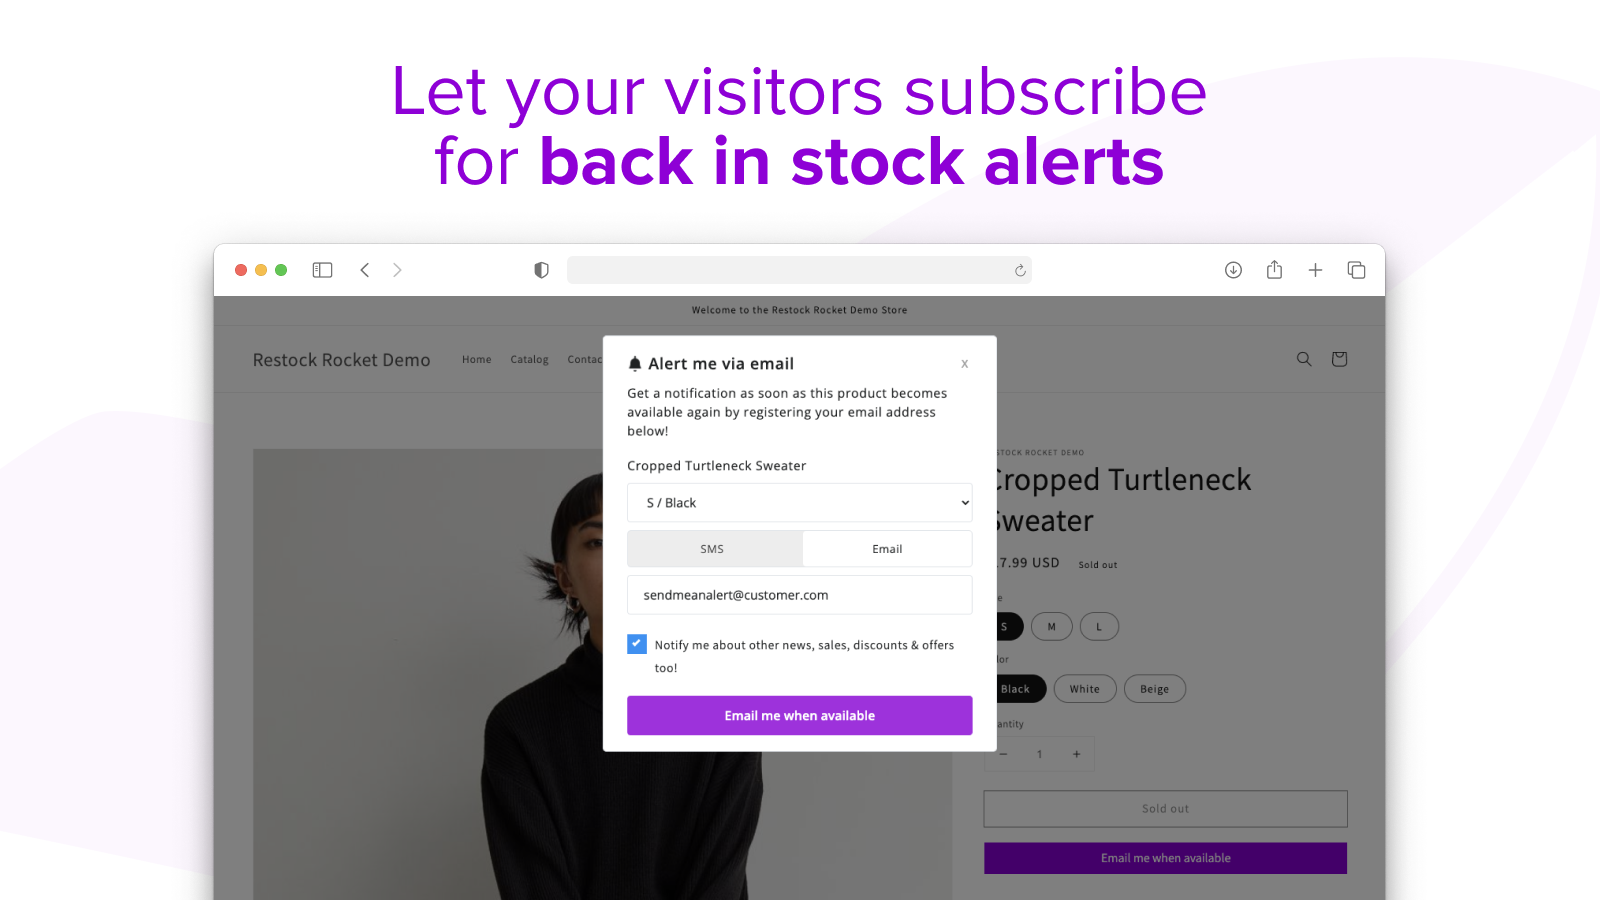 Let your visitors subscribe for back in stock alerts